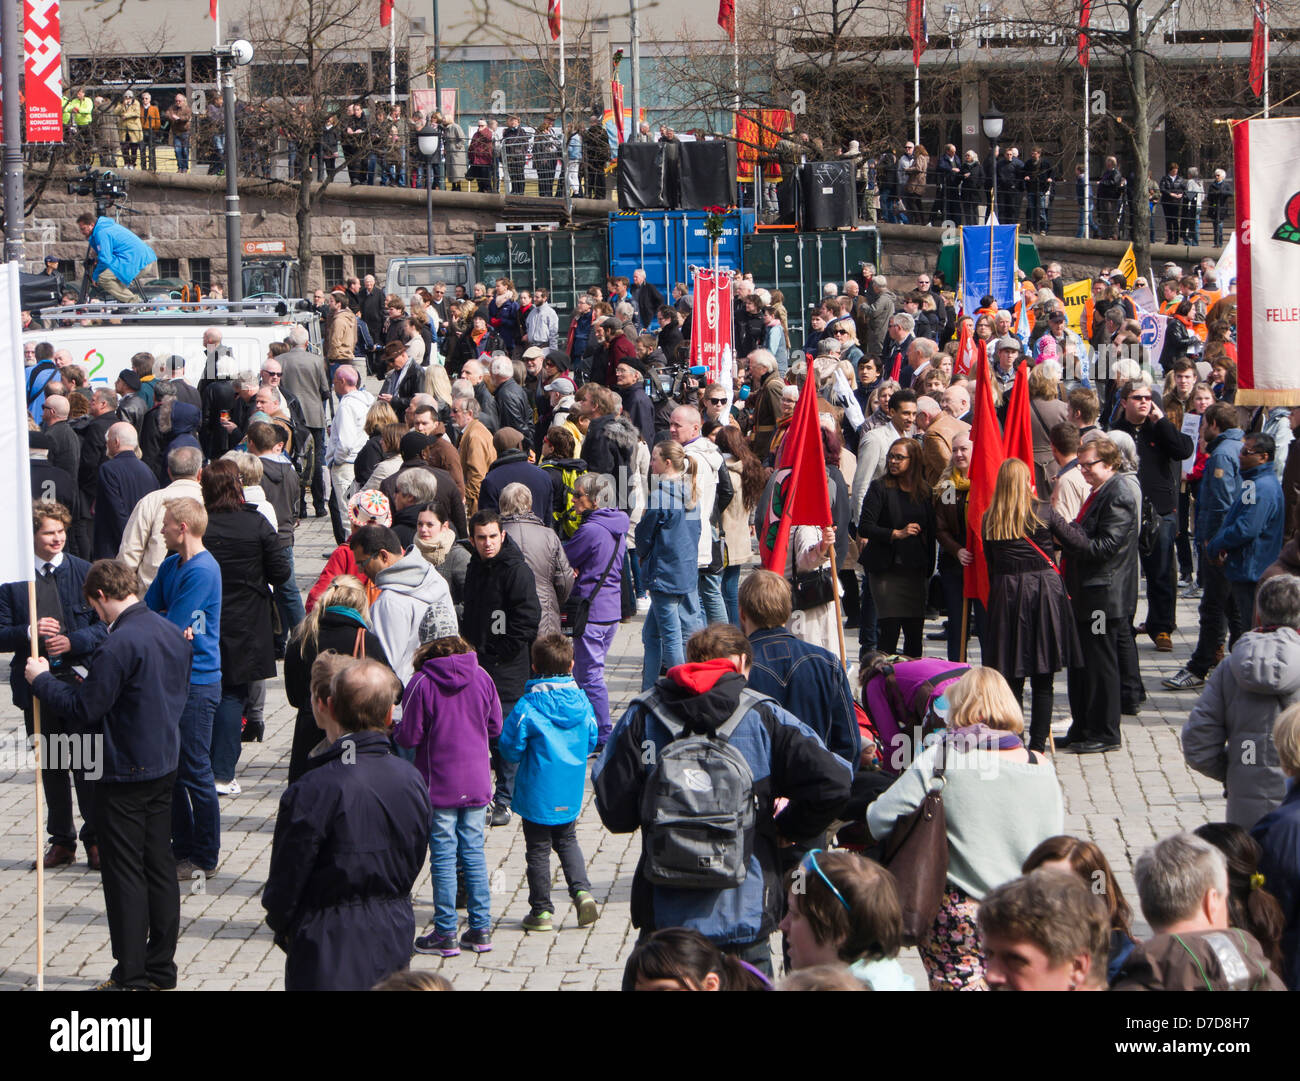 May 1 2013, labour day celebrations in Oslo Norway crowd listening to speeches in Youngstorget Stock Photo